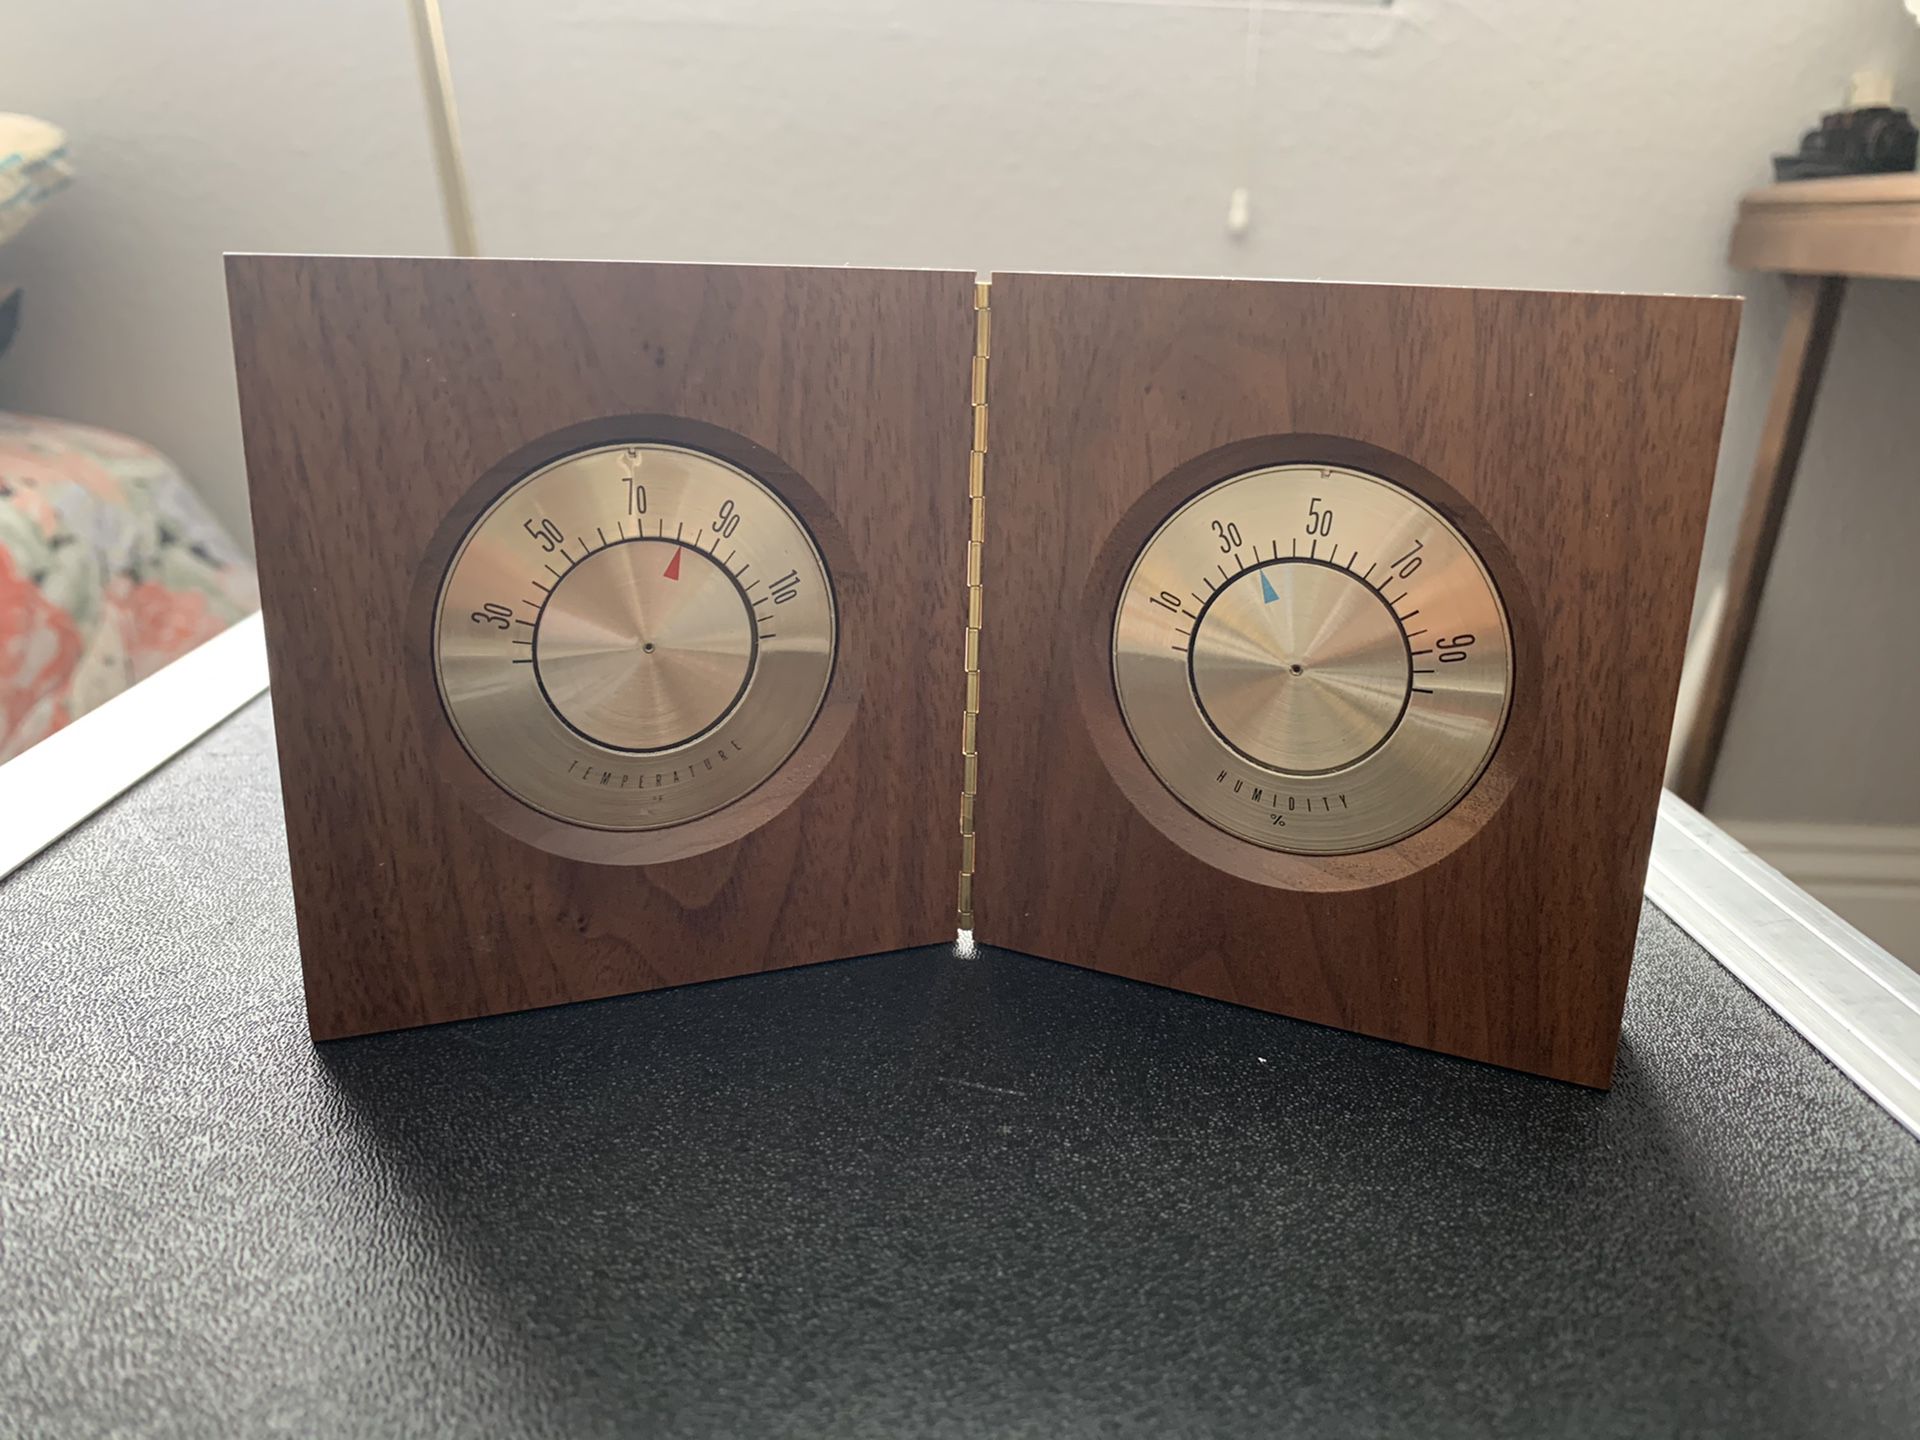 Solid wood desk Honeywell thermometer and humidifier